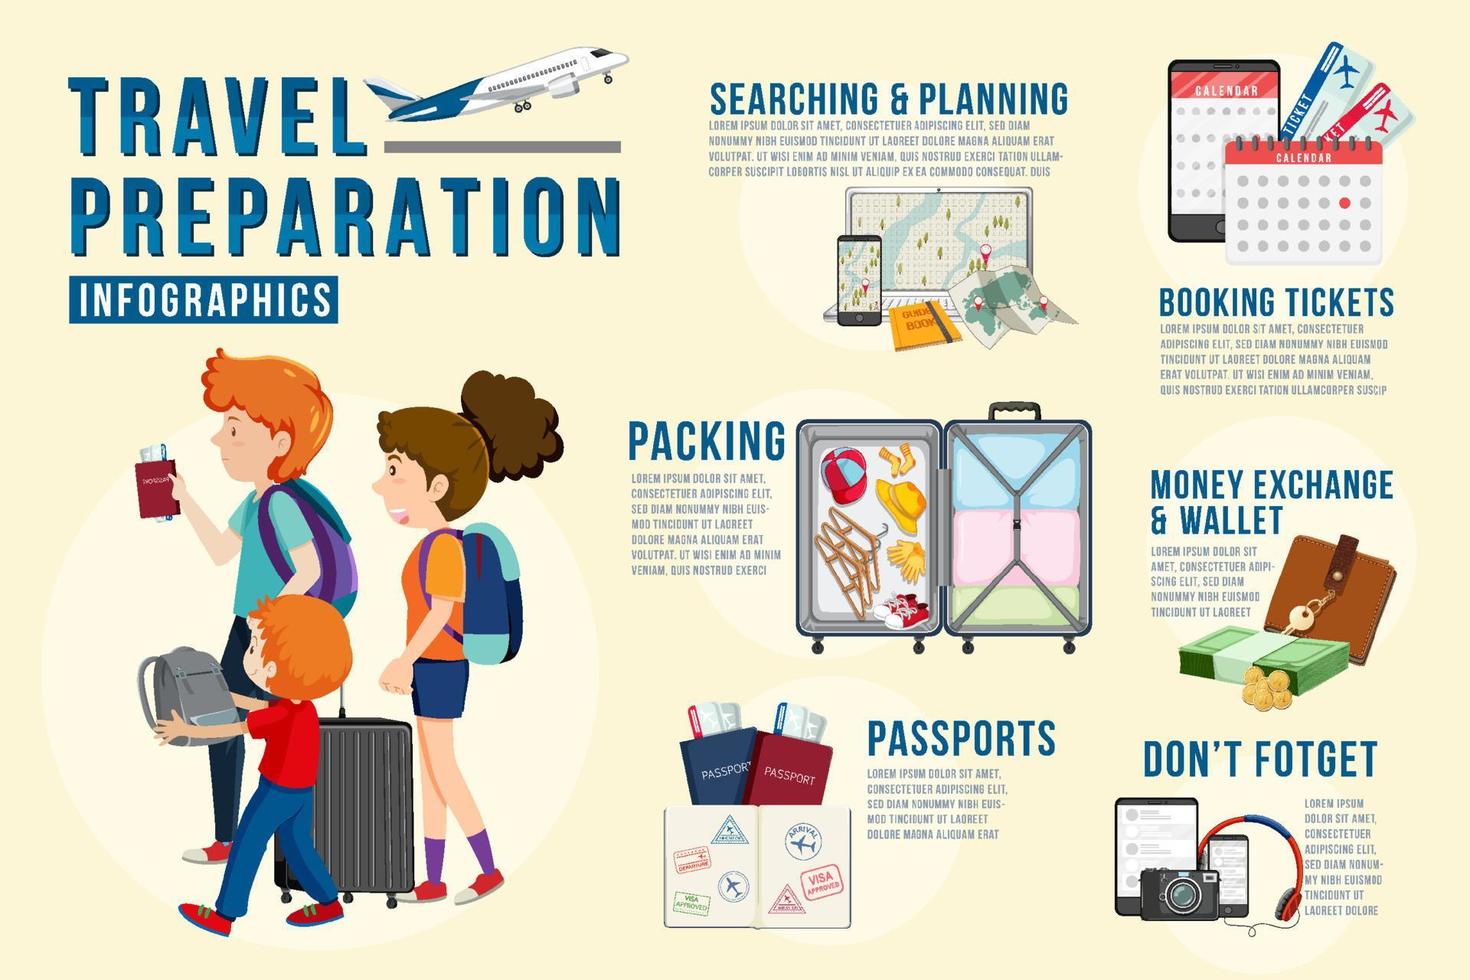 Travel preparation infographic template vector